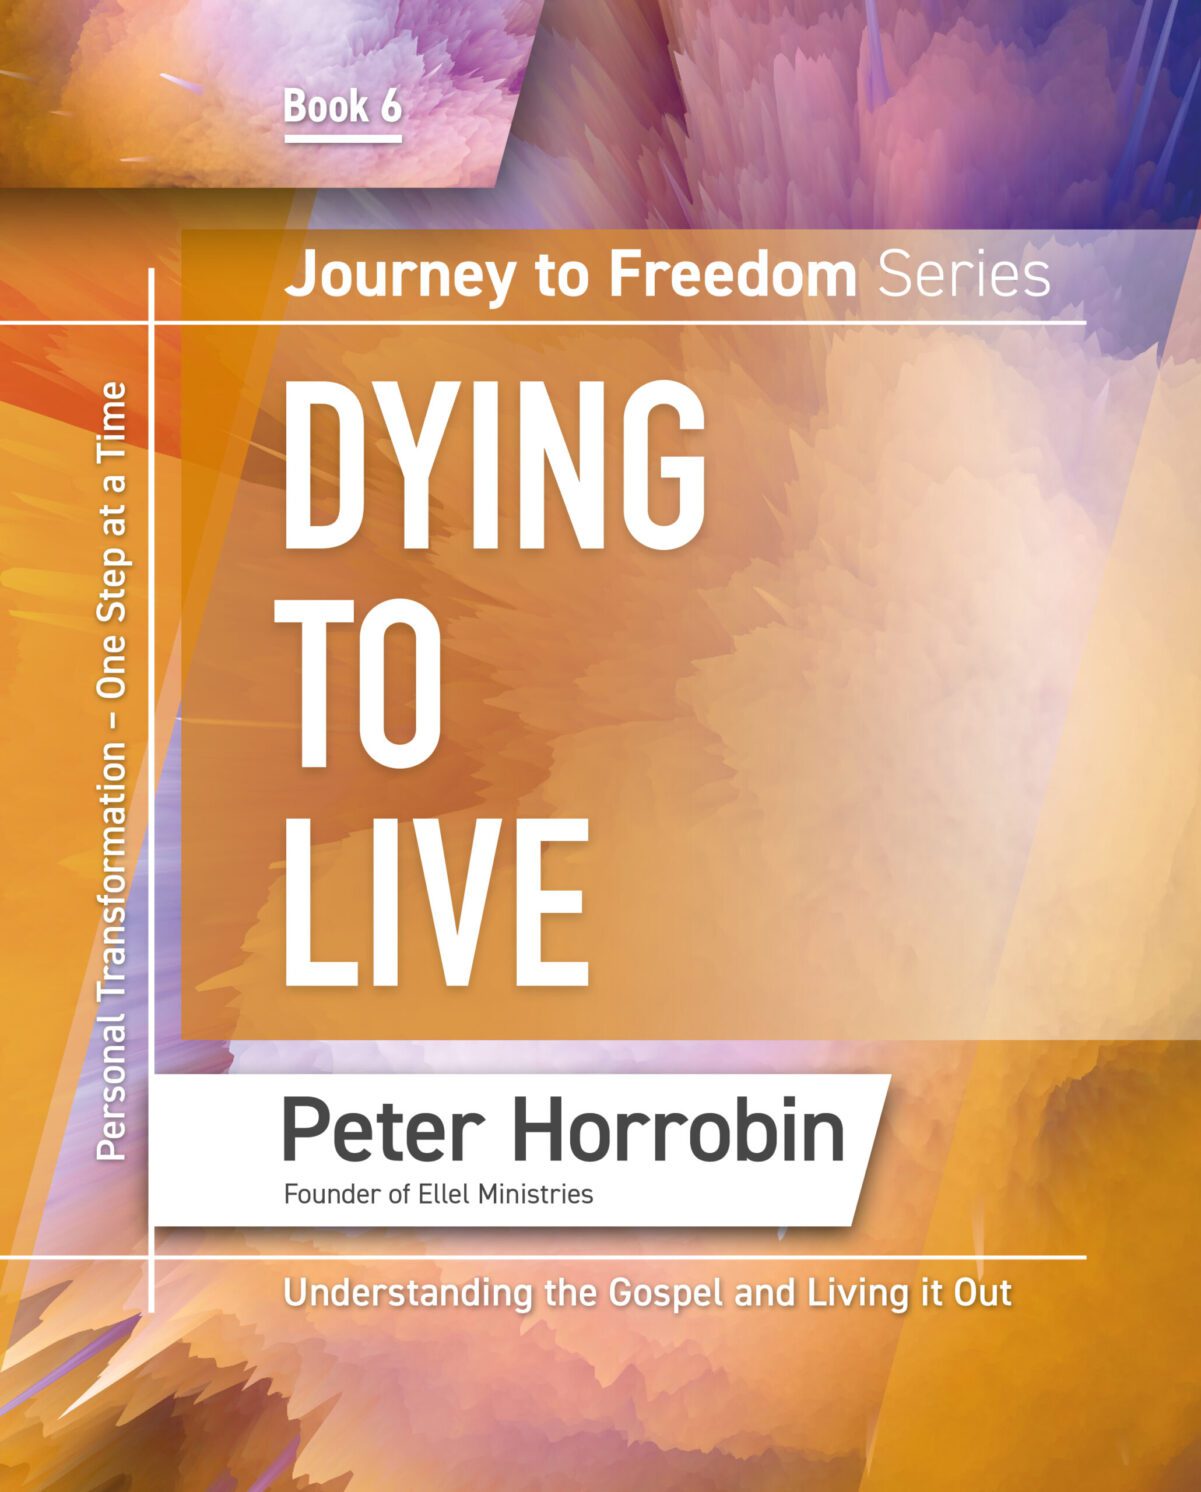 Journey to Freedom Book 6 – Dying to Live